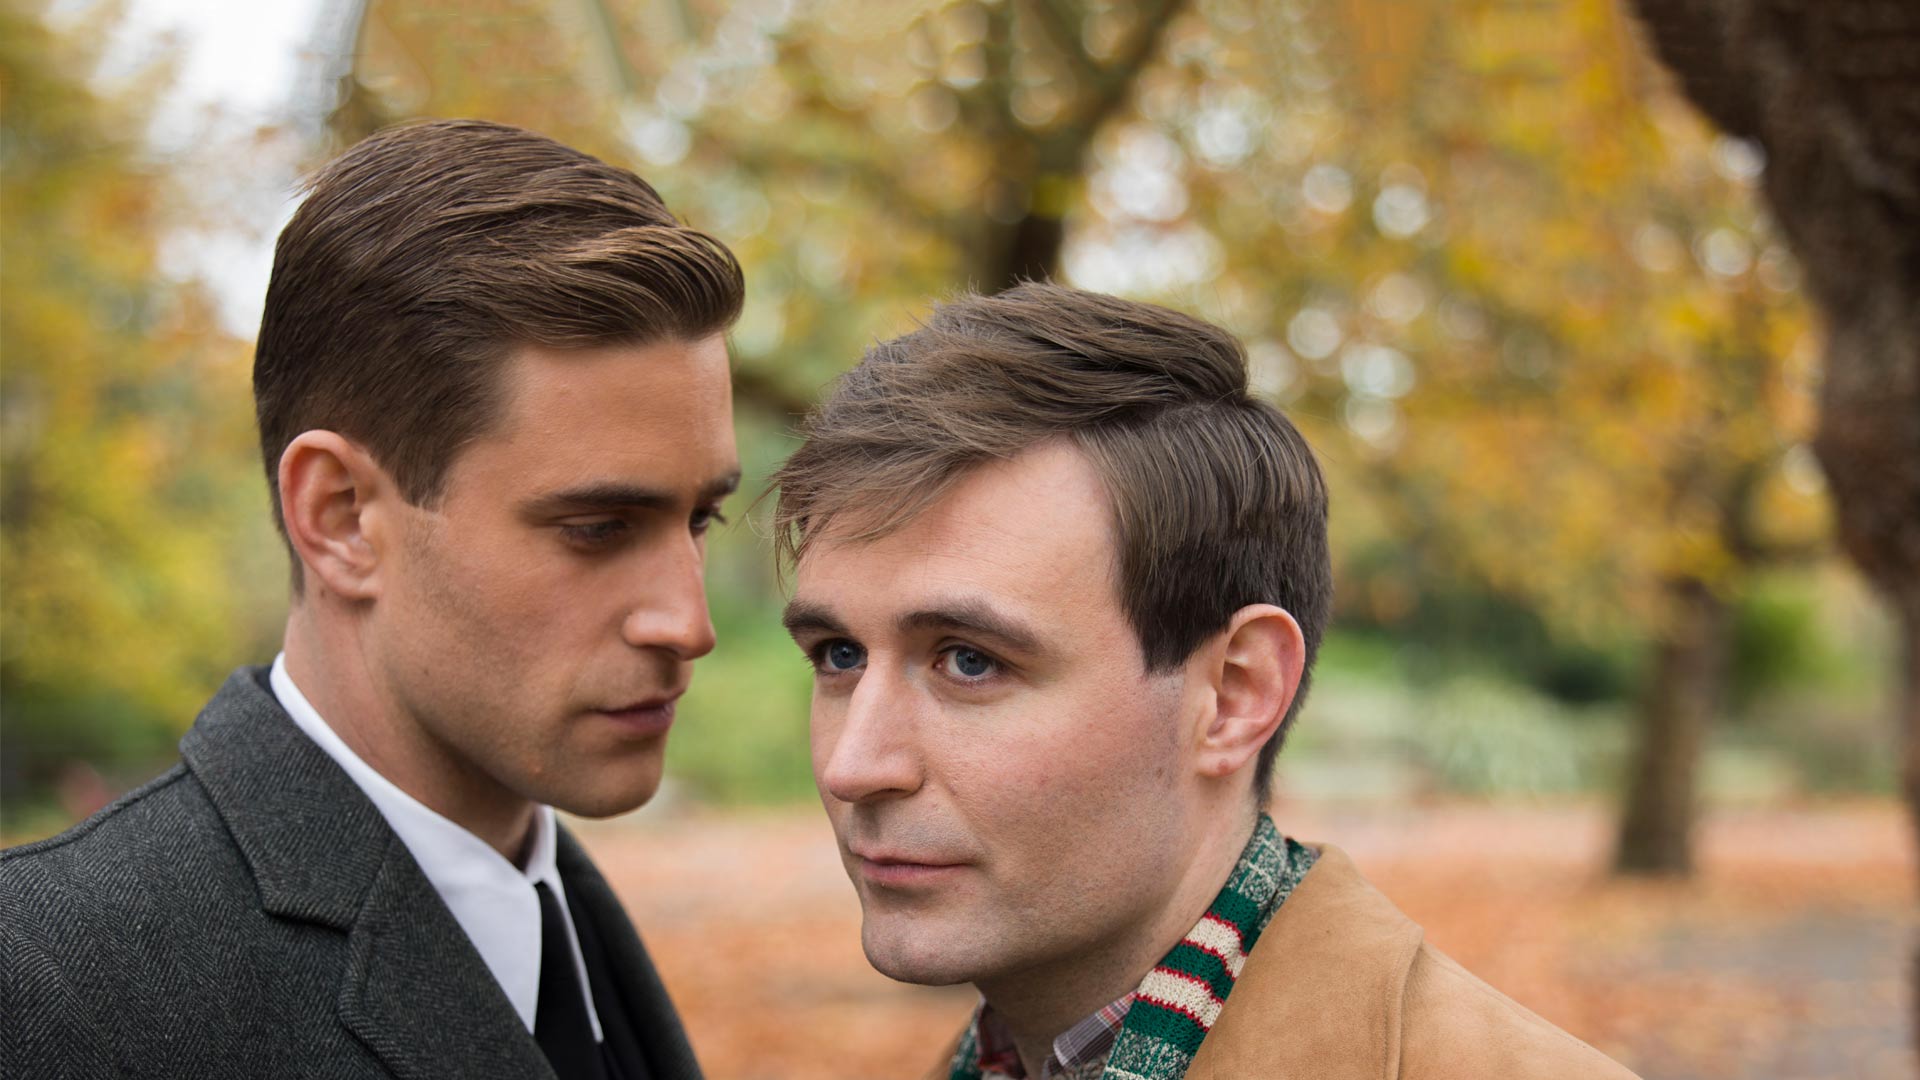 Shown from left to right: Oliver Jackson-Cohen as Michael Berryman and James McArdle as Thomas March